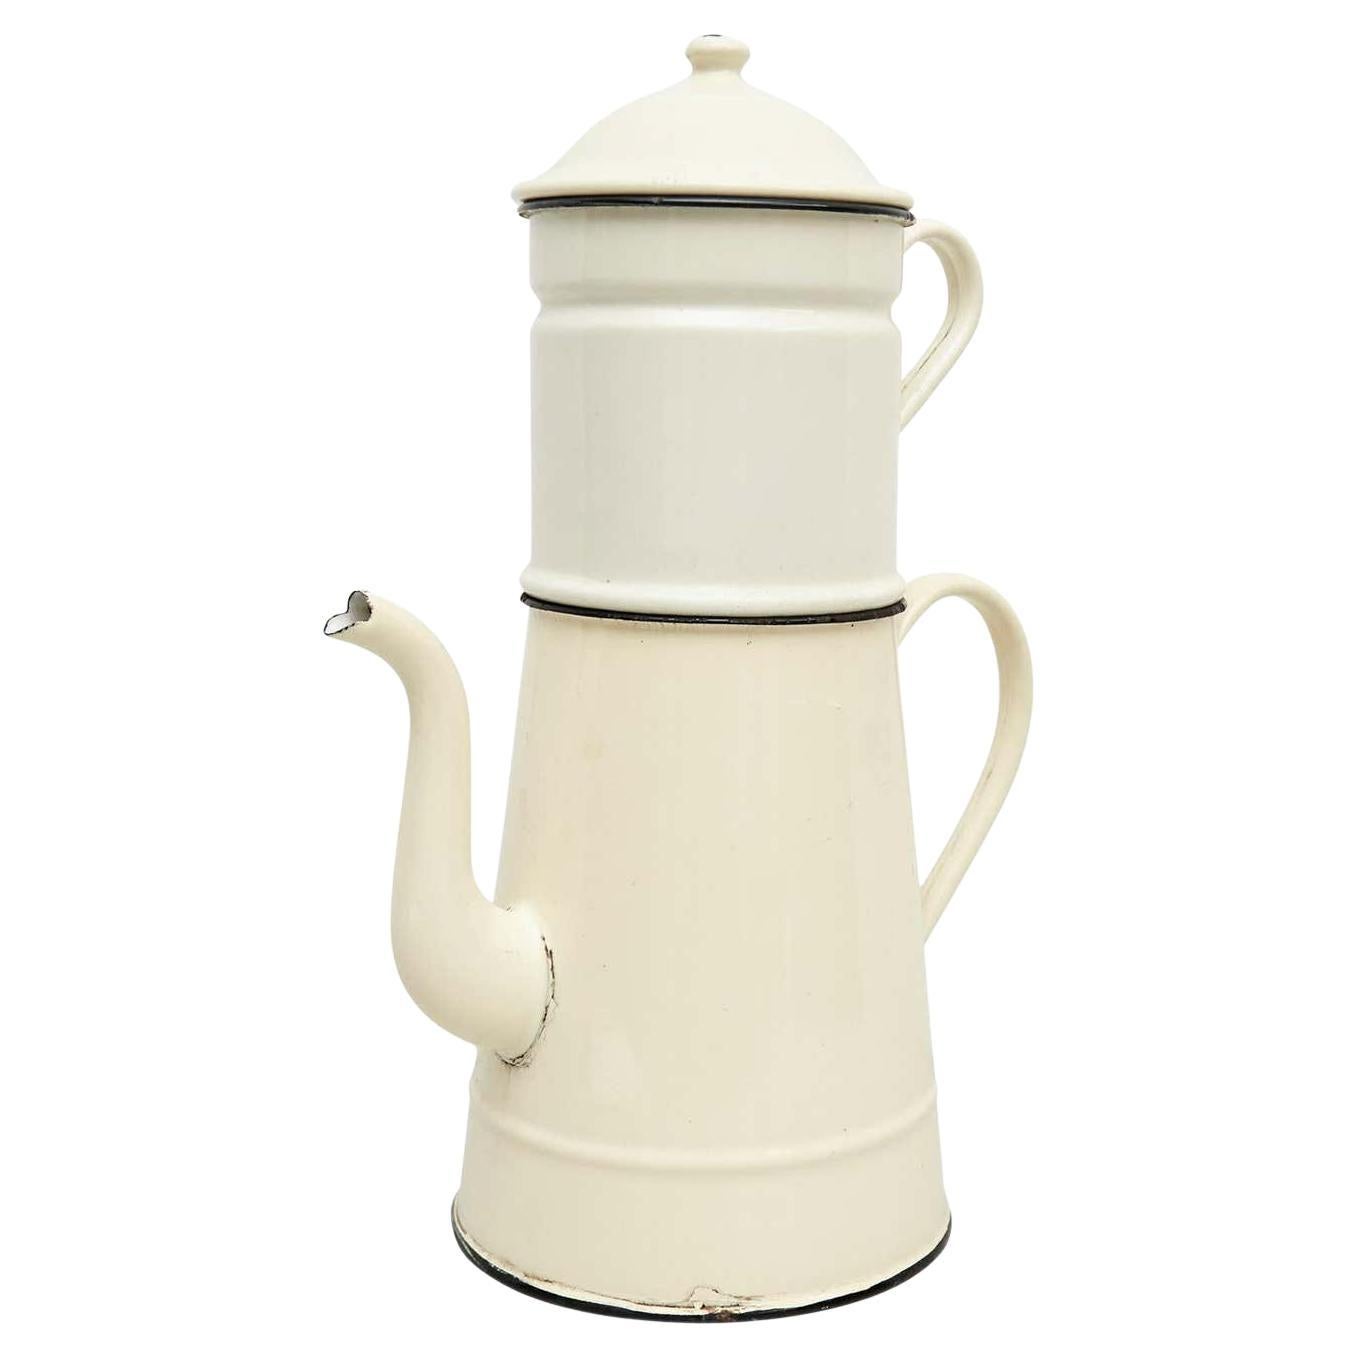 Vintage French Enamelwared Sculptural Decorative Coffee Maker, circa 1920 For Sale